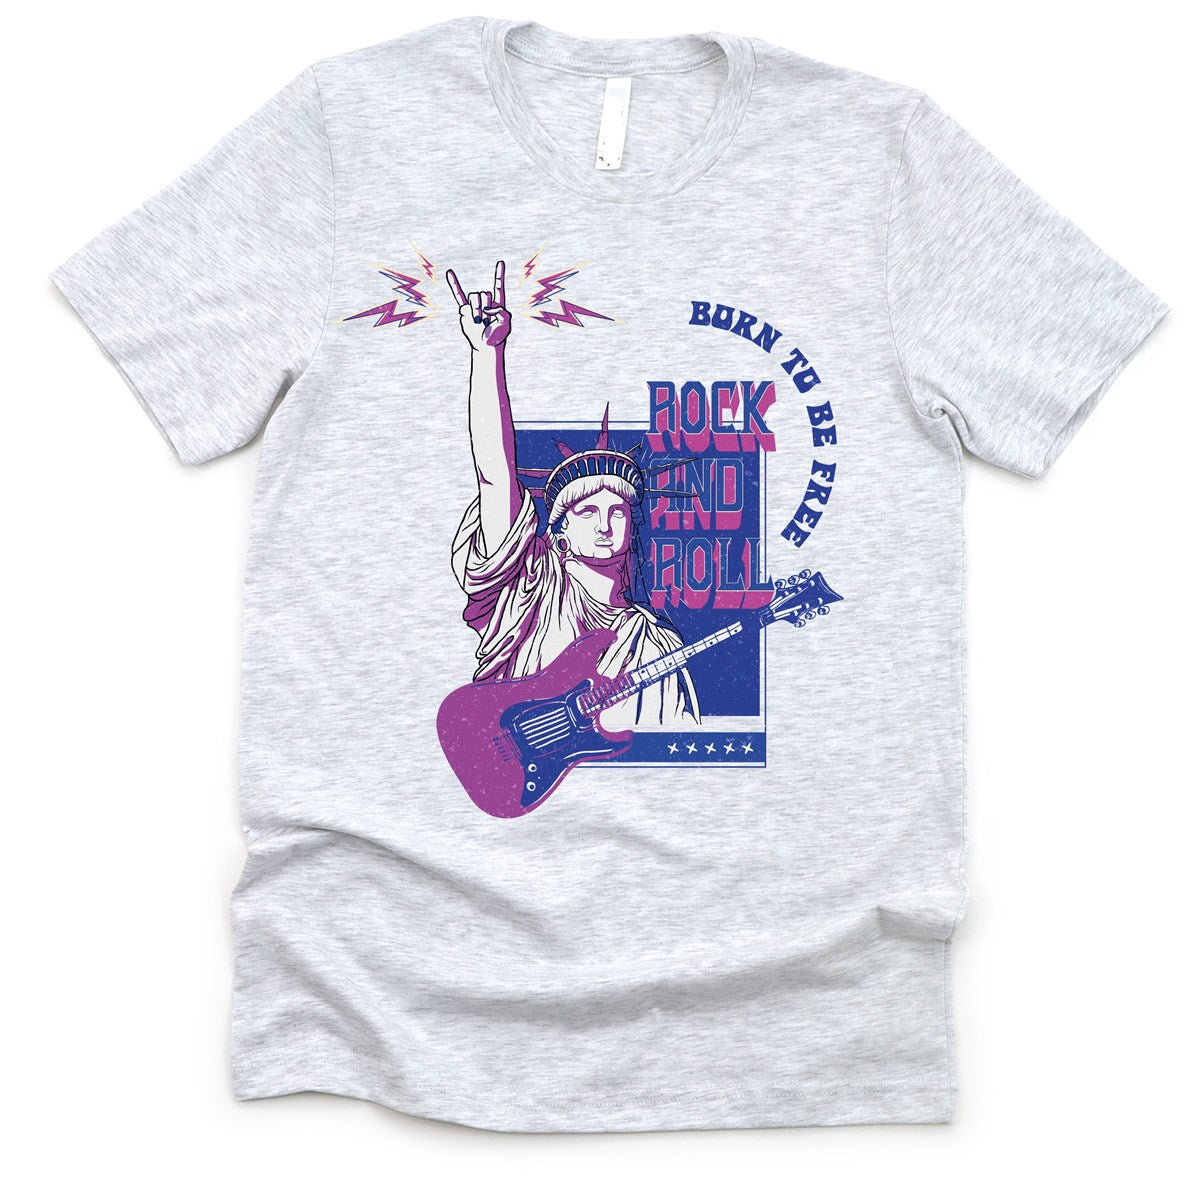 Rock & Roll Born To Be Free Statue of Liberty T-Shirt or Crew Sweatshirt